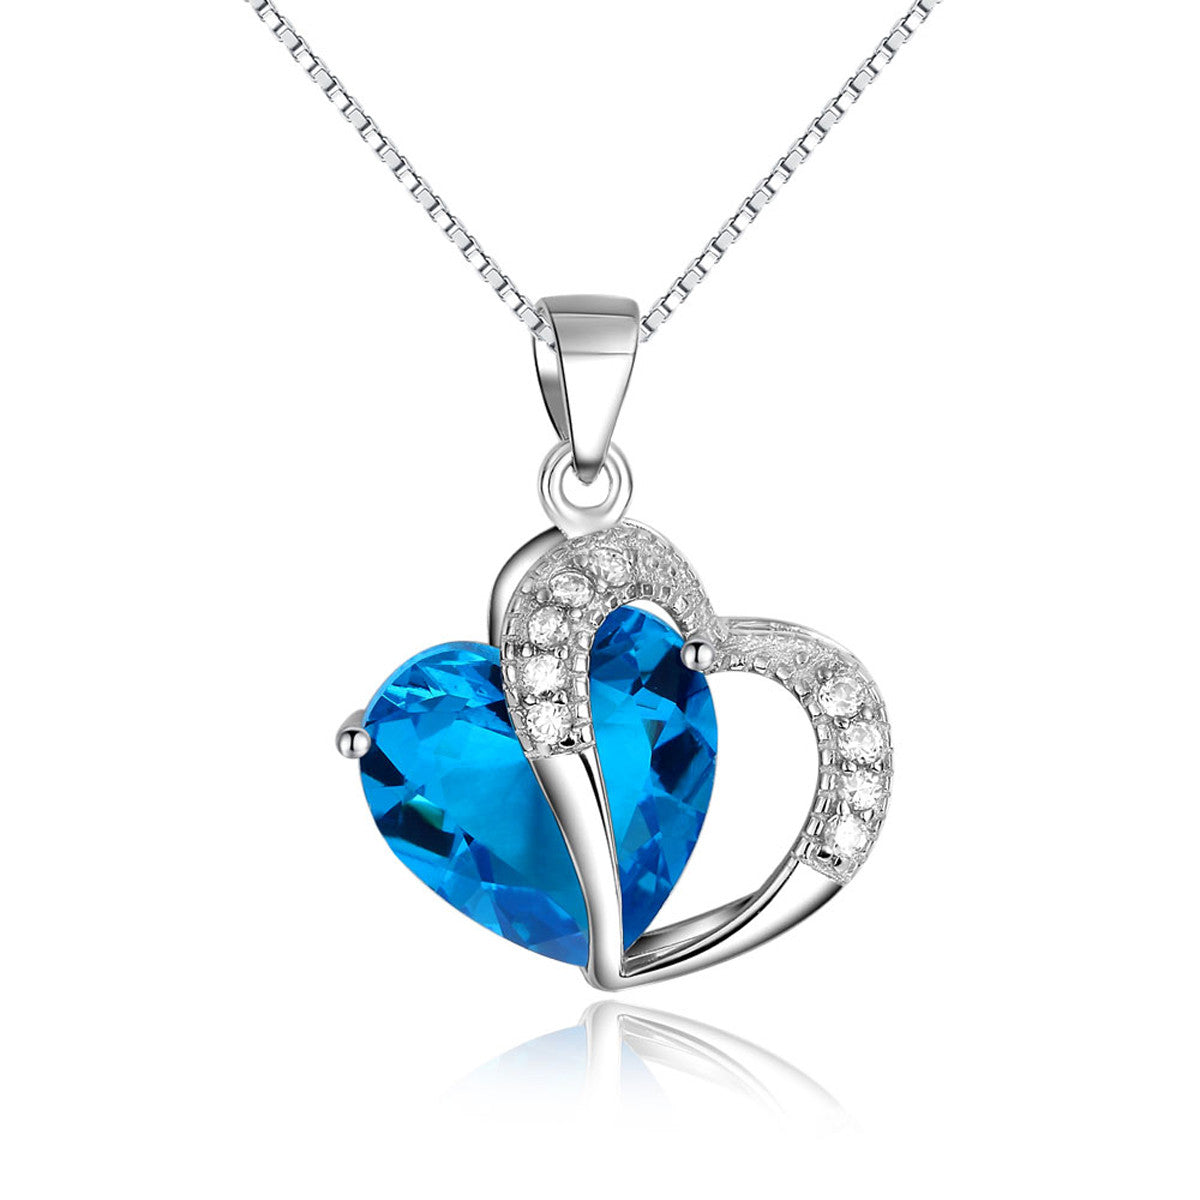 Jewelry Trends Sterling Silver Double Heart Pendant with Blue and Clear CZ Crystals on Box Chain Necklace Jewelry